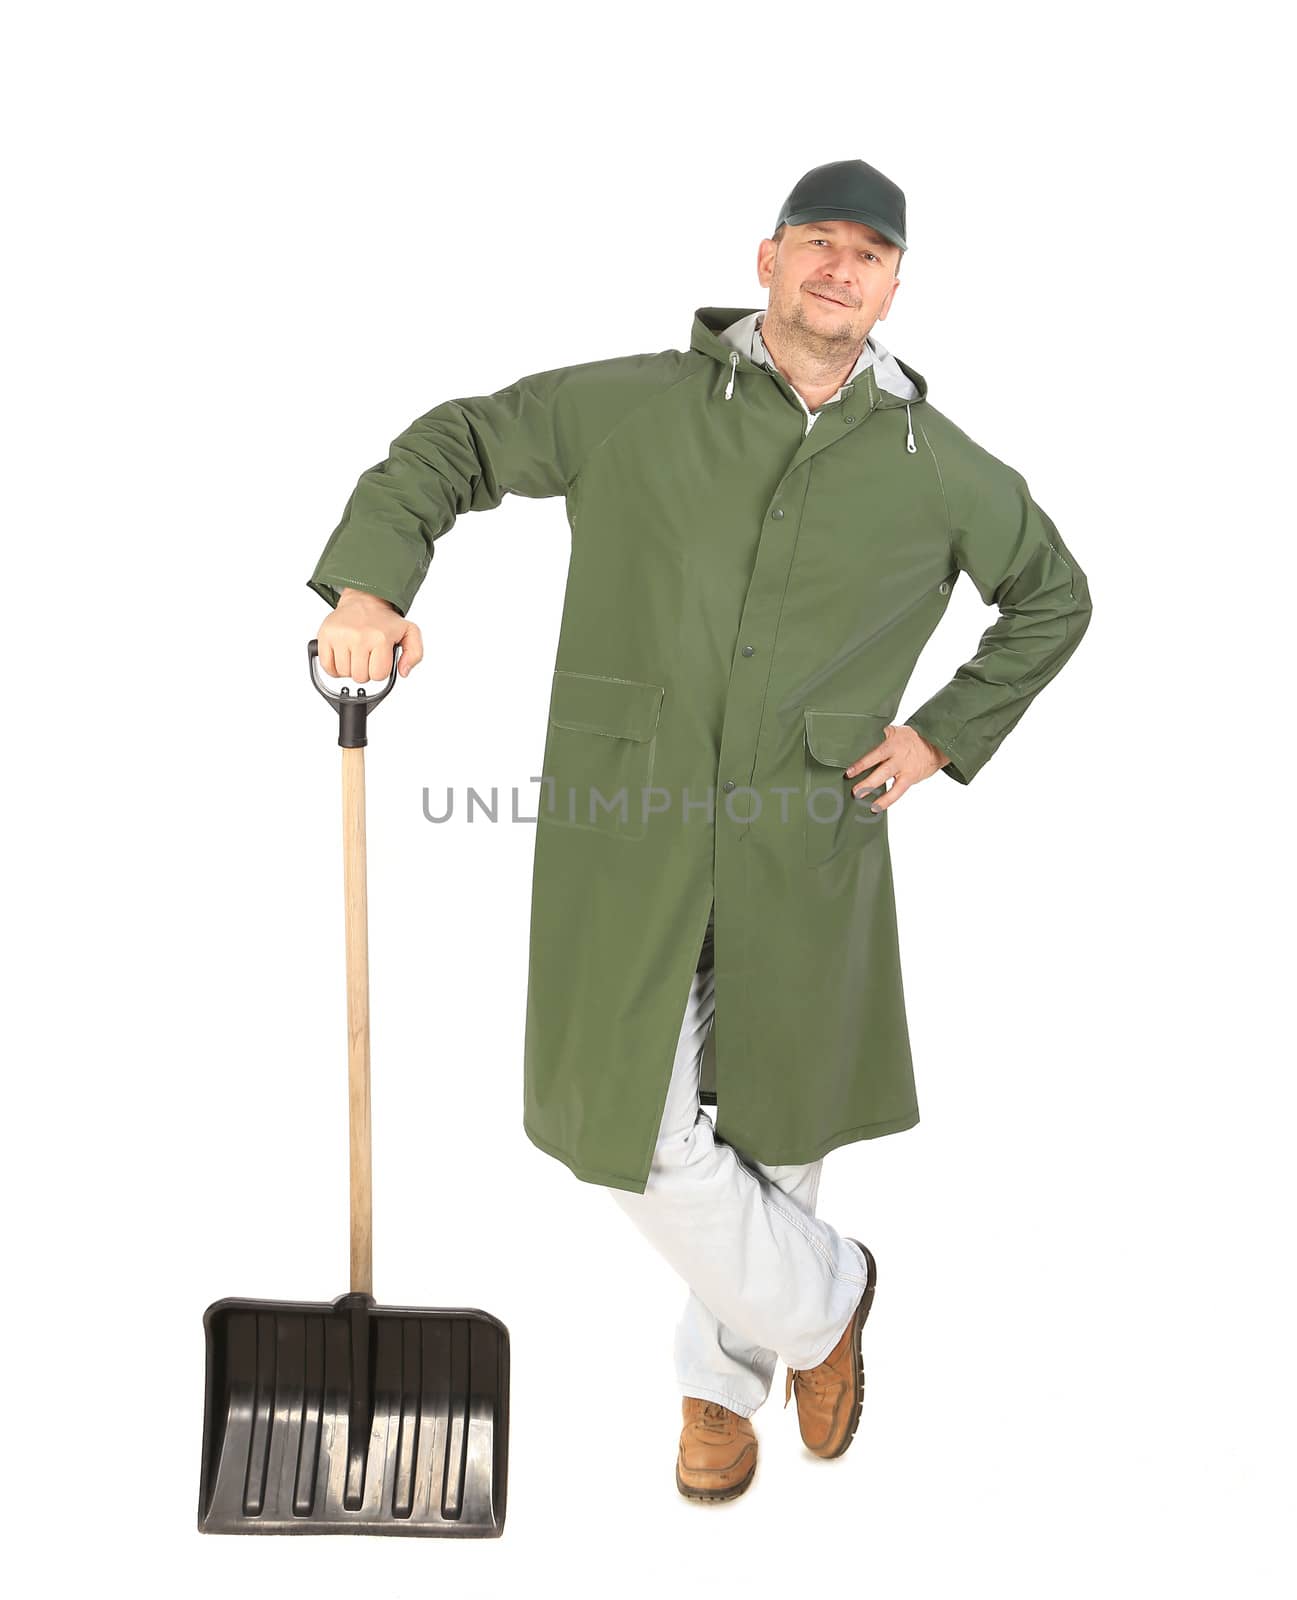 Man in long vest with shovel. Isolated on a white background.